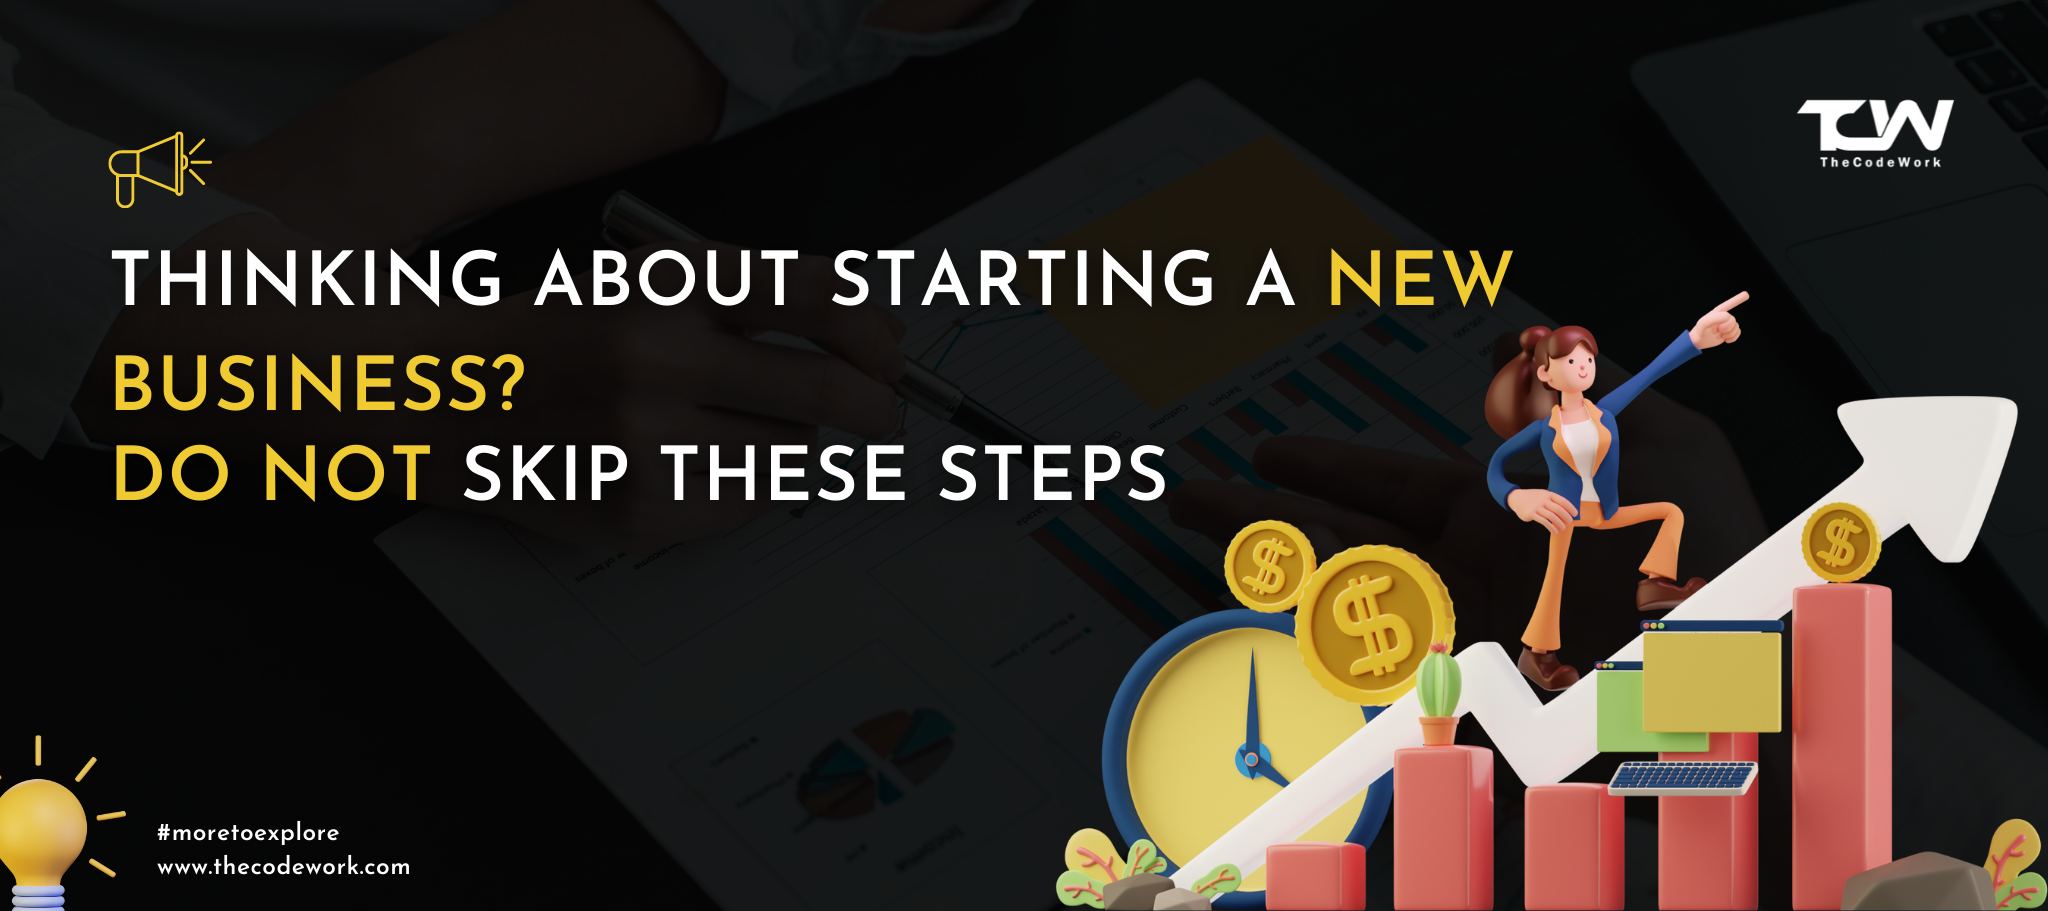 Thinking about starting a new business? DO NOT skip these steps!  